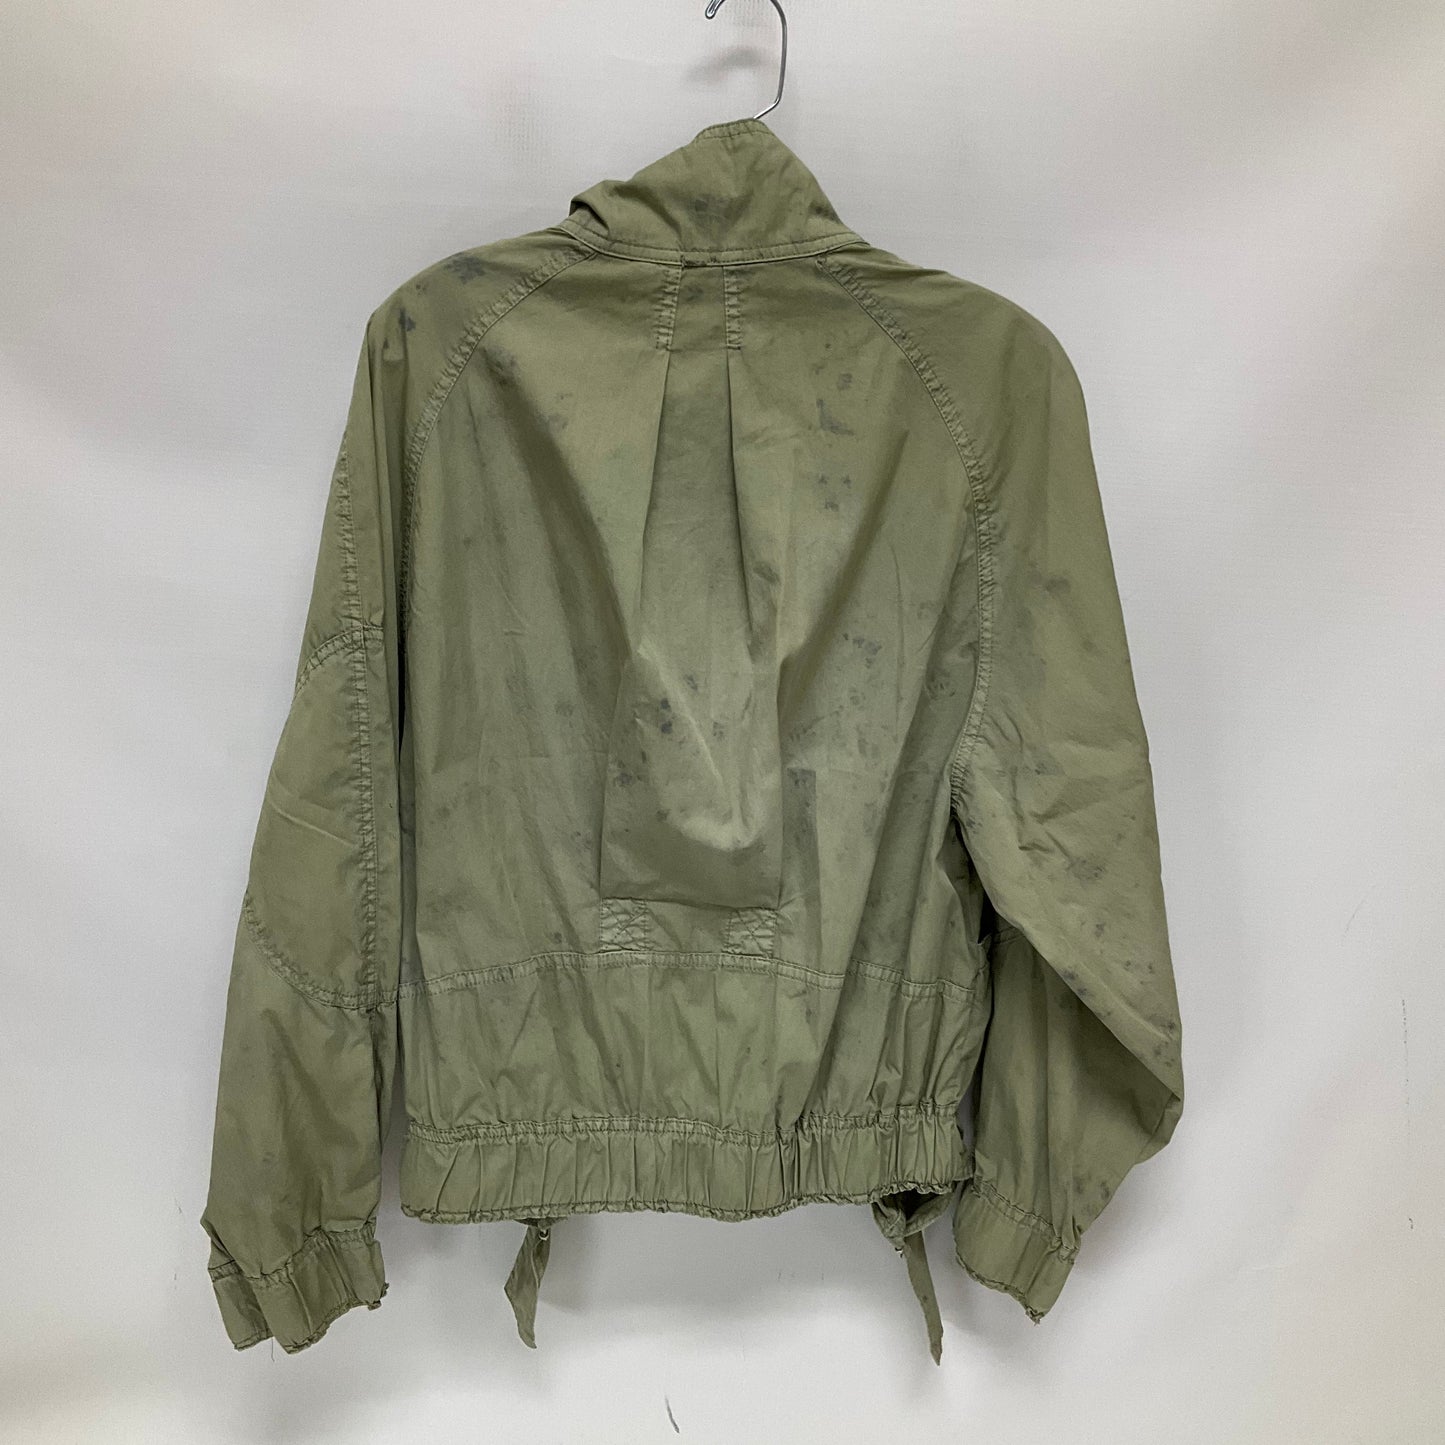 Green Jacket Other Free People, Size S